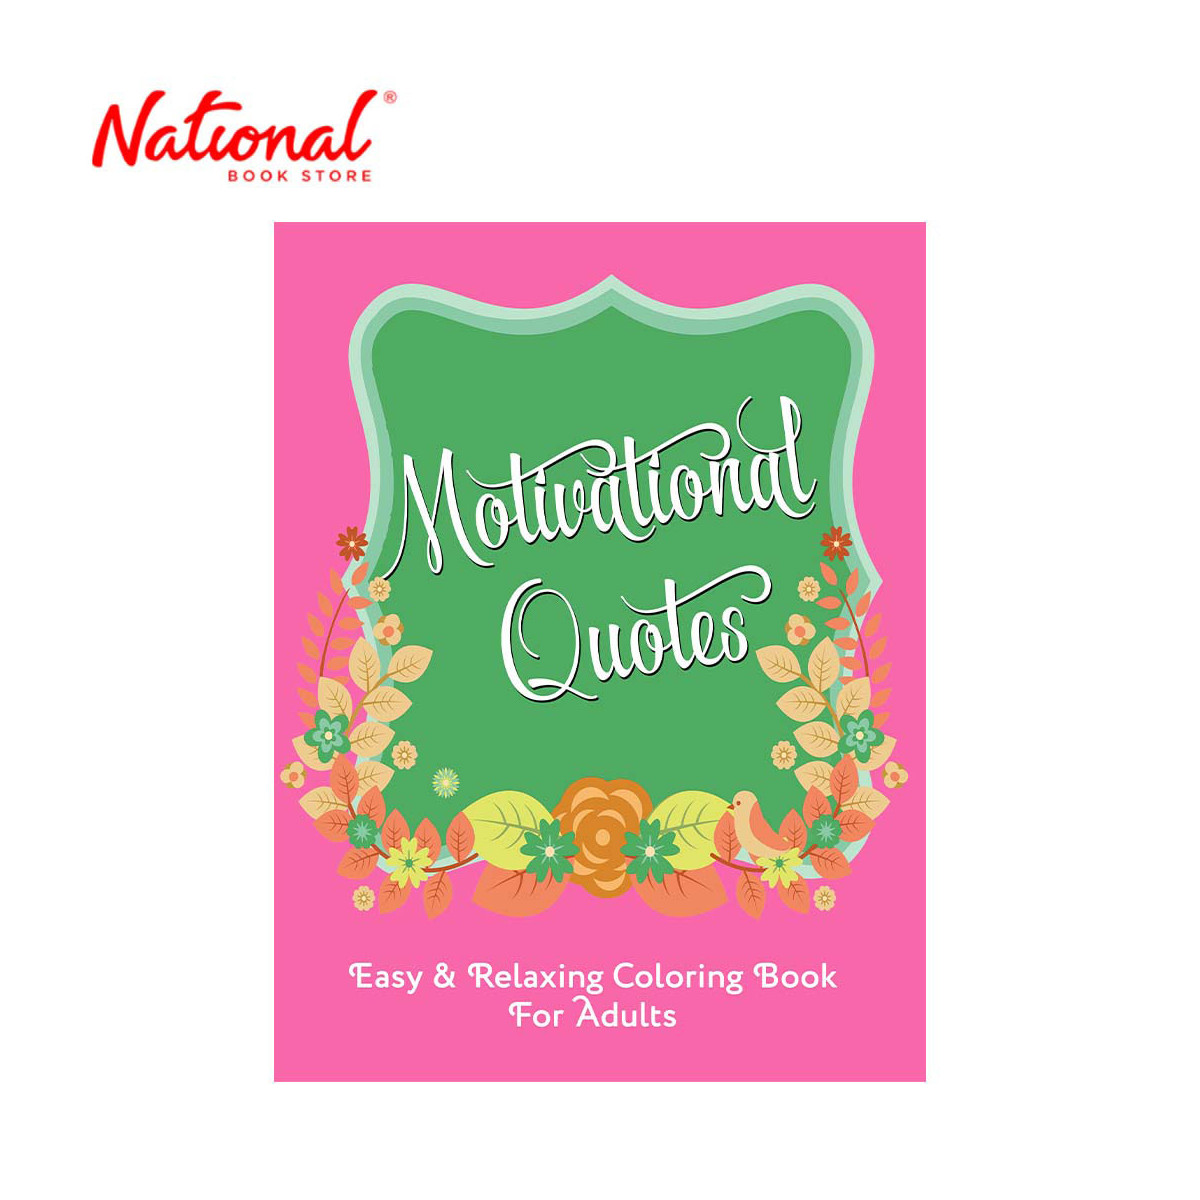 Motivational Quotes Coloring Book for Adults - Trade Paperback - Art Books